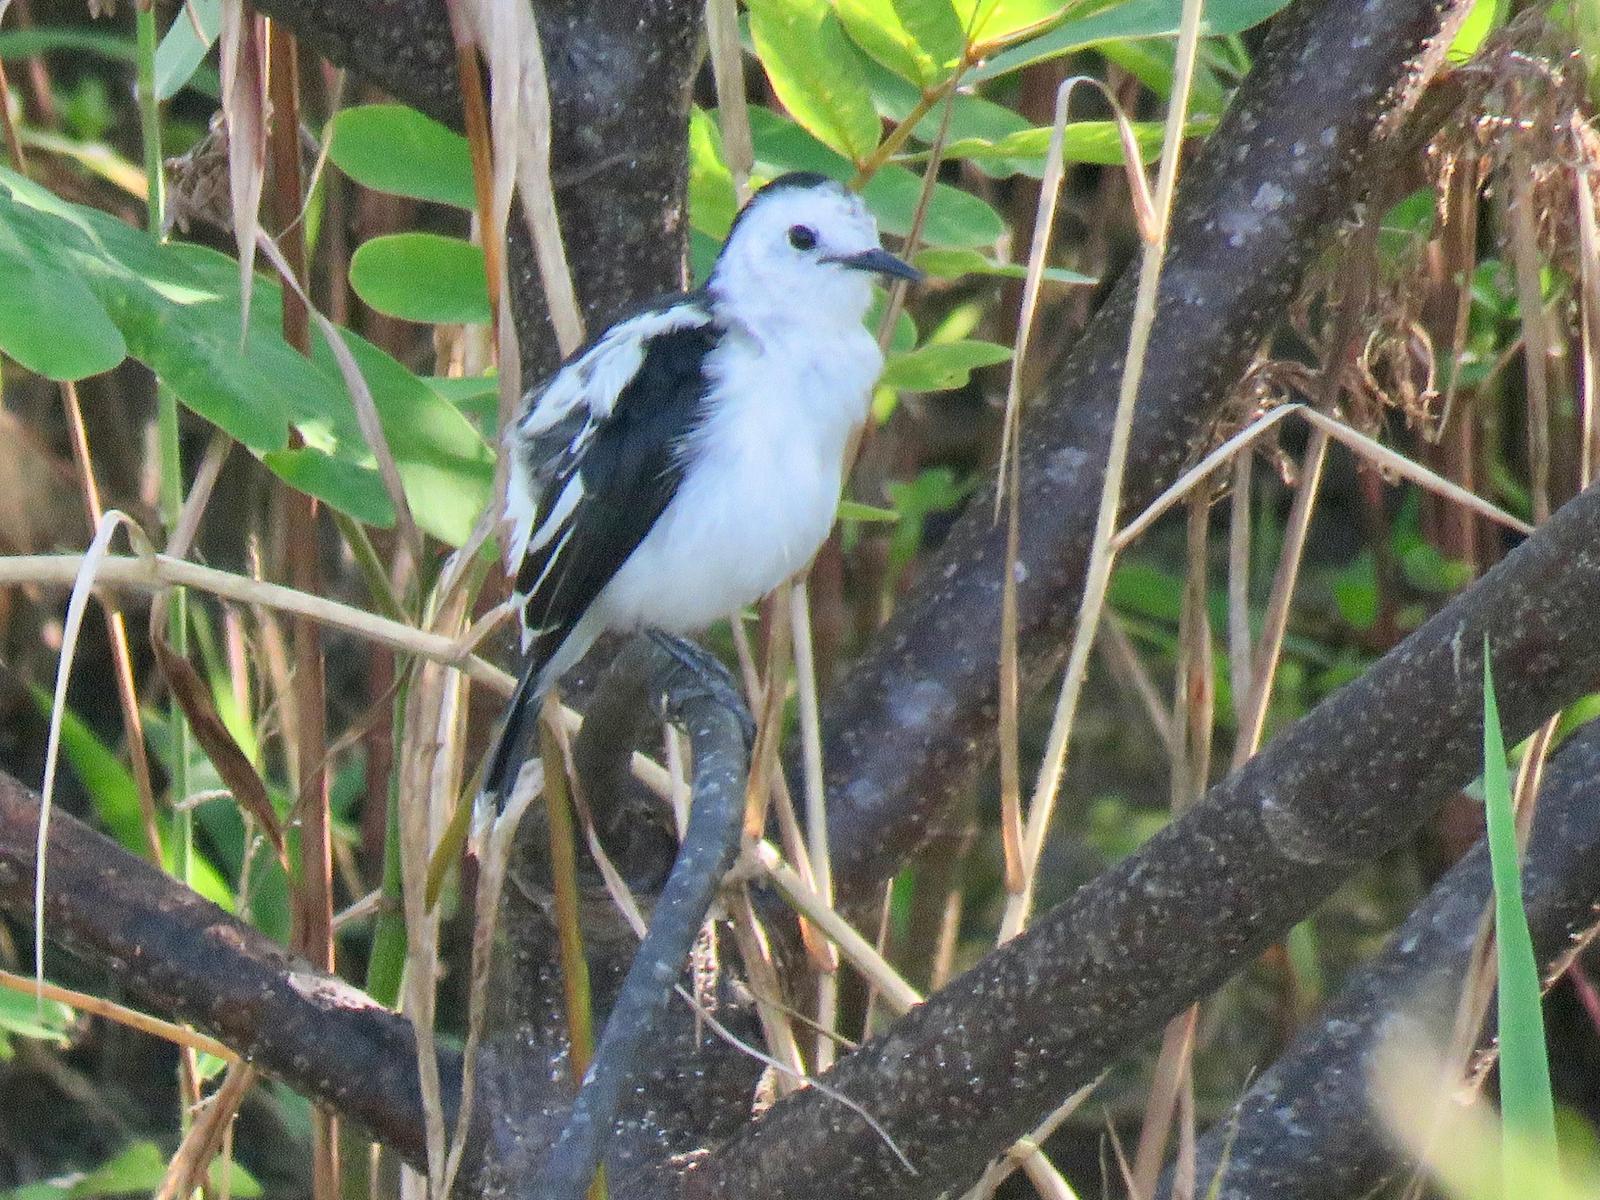 Pied Water-Tyrant Photo by James DeBiase